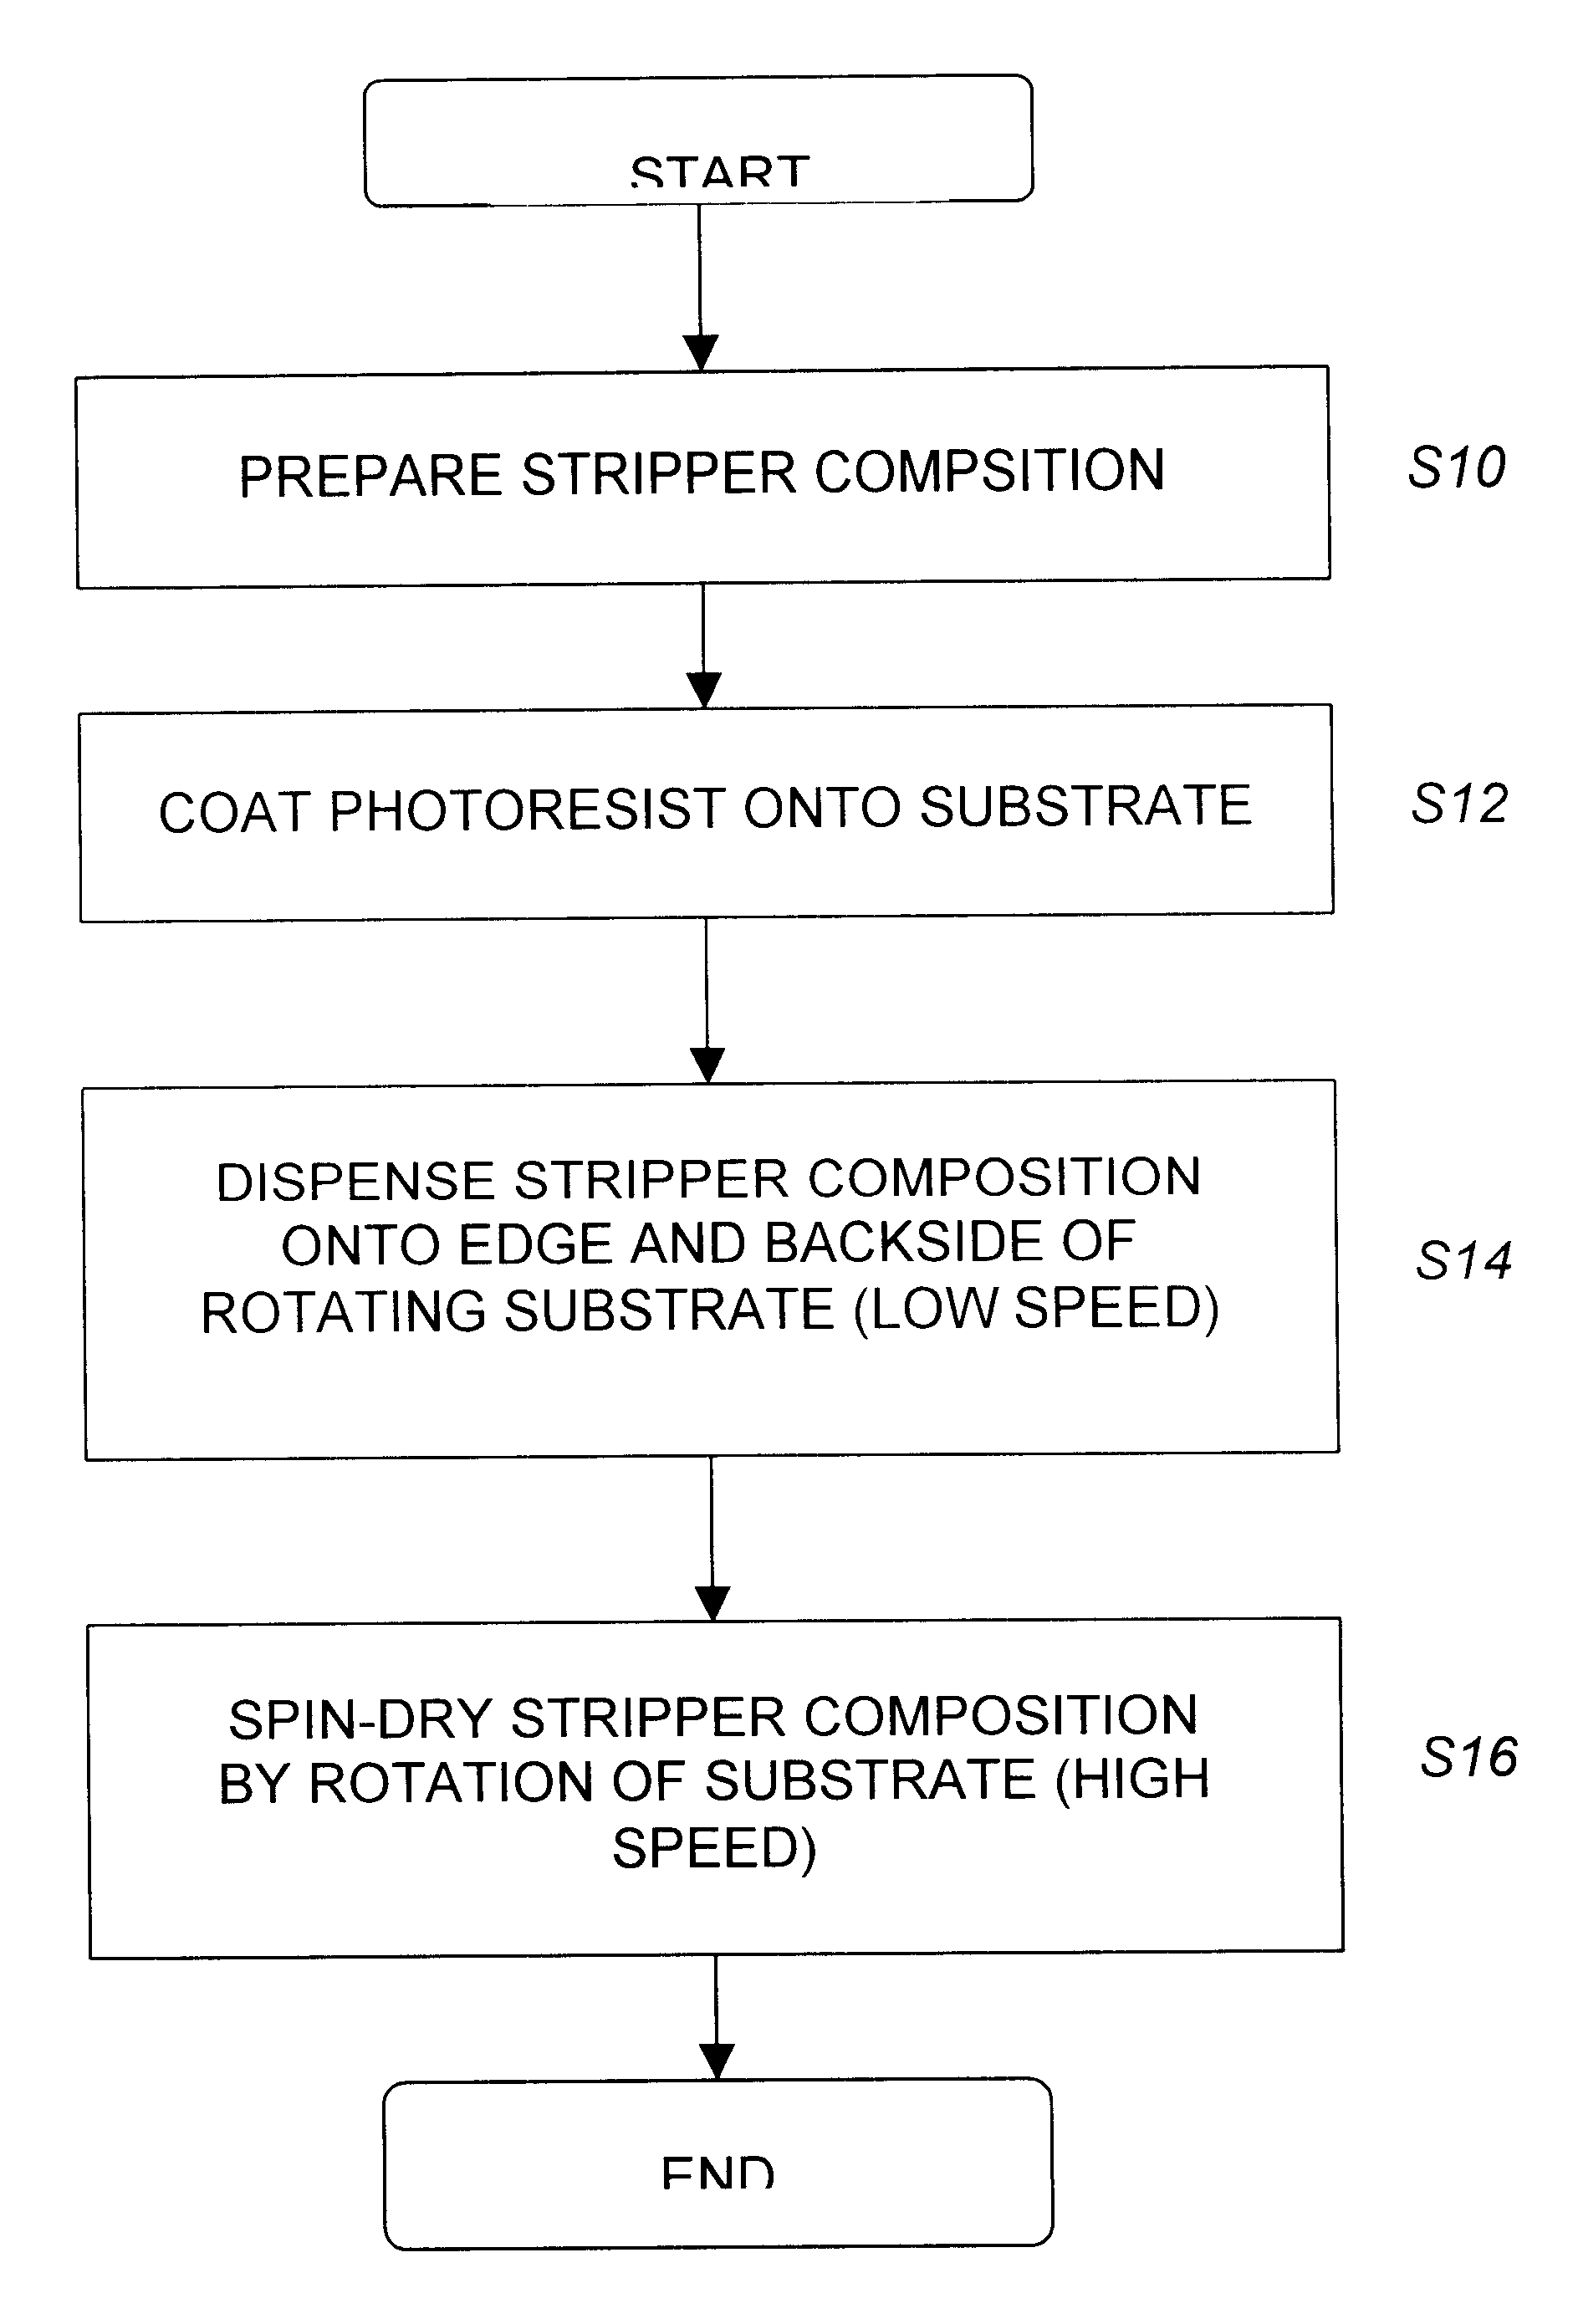 Photoresist stripper compositions